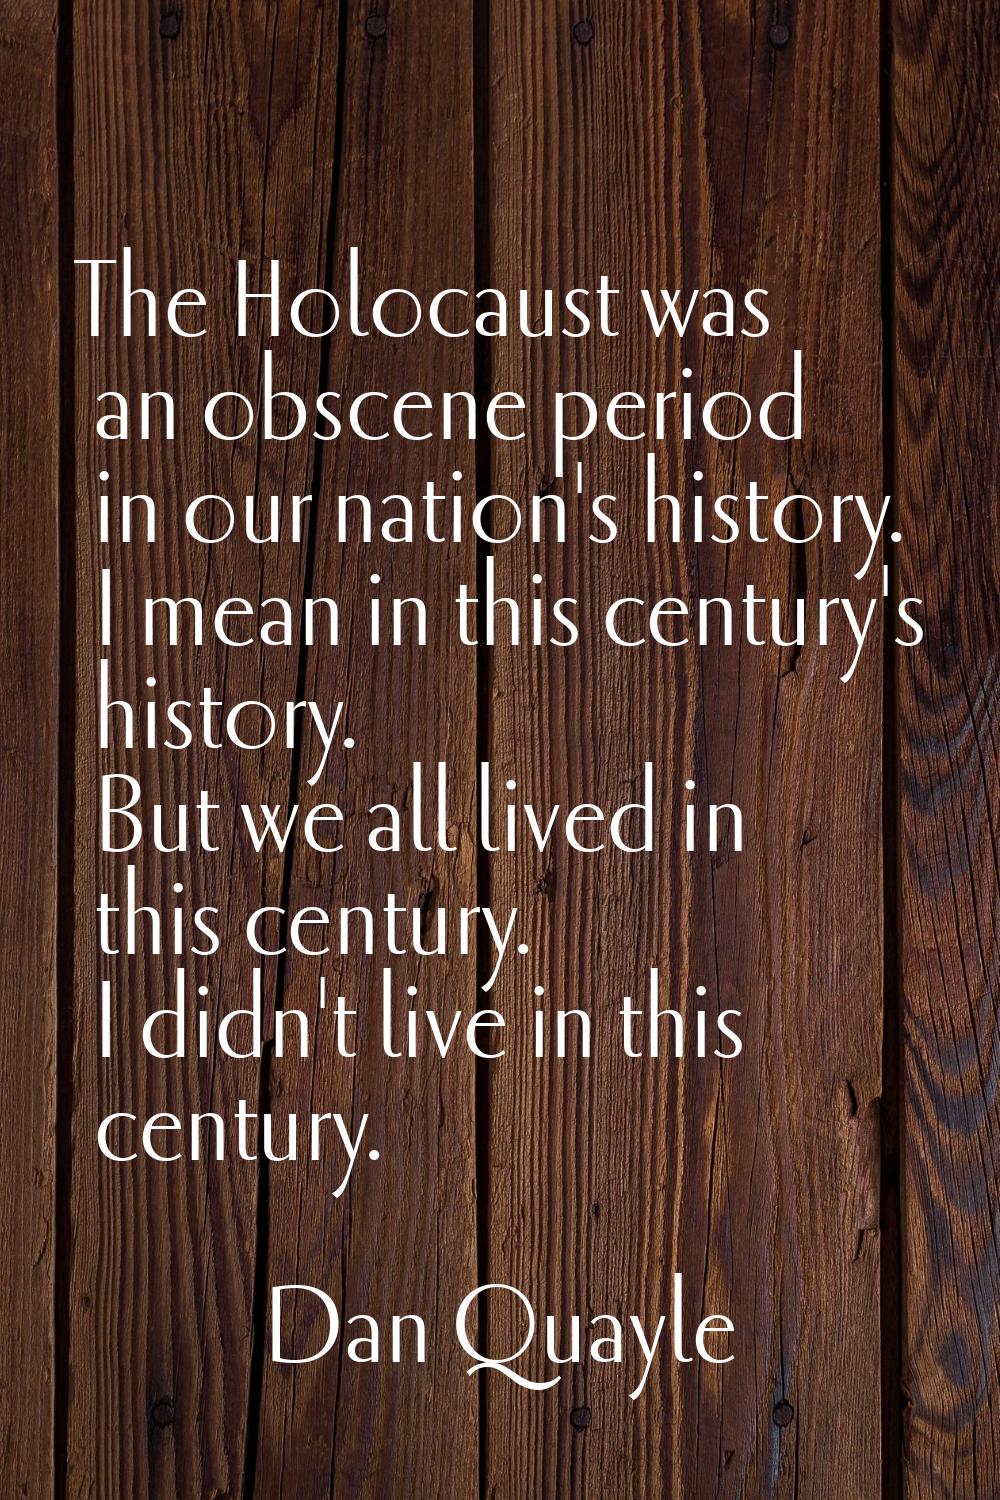 The Holocaust was an obscene period in our nation's history. I mean in this century's history. But 